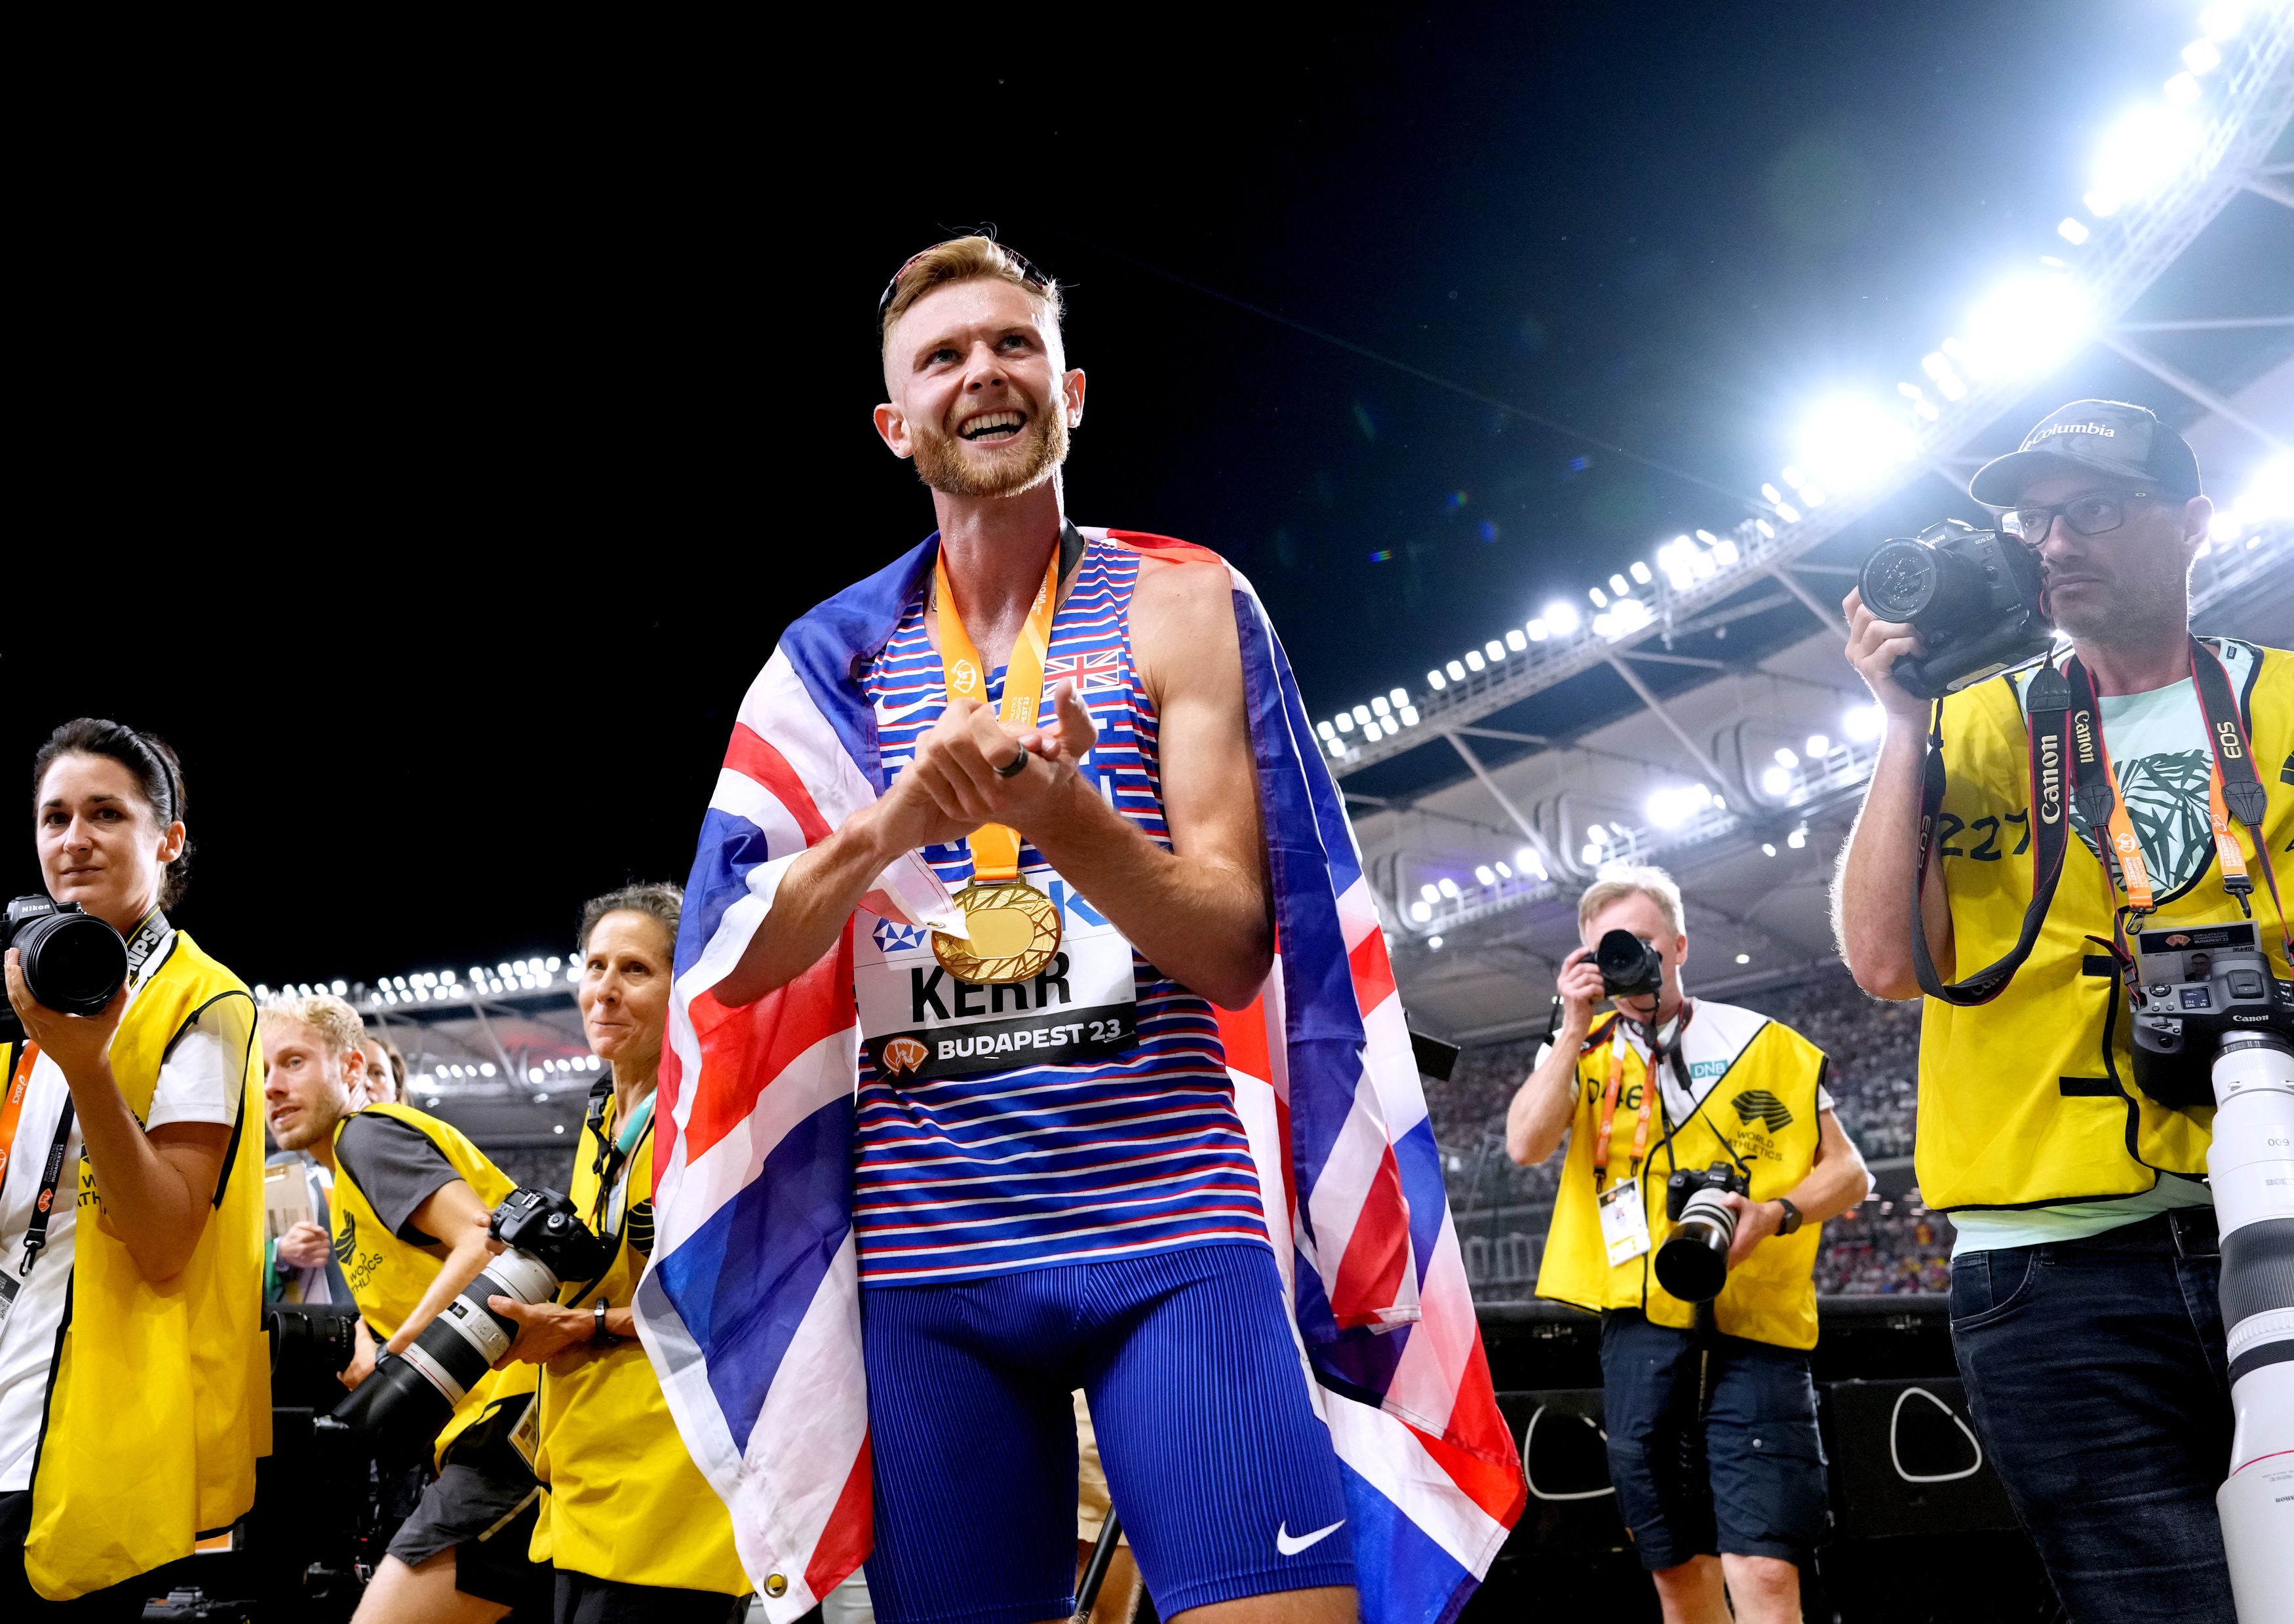 Kerr is the 1500m world champion after winning gold last year